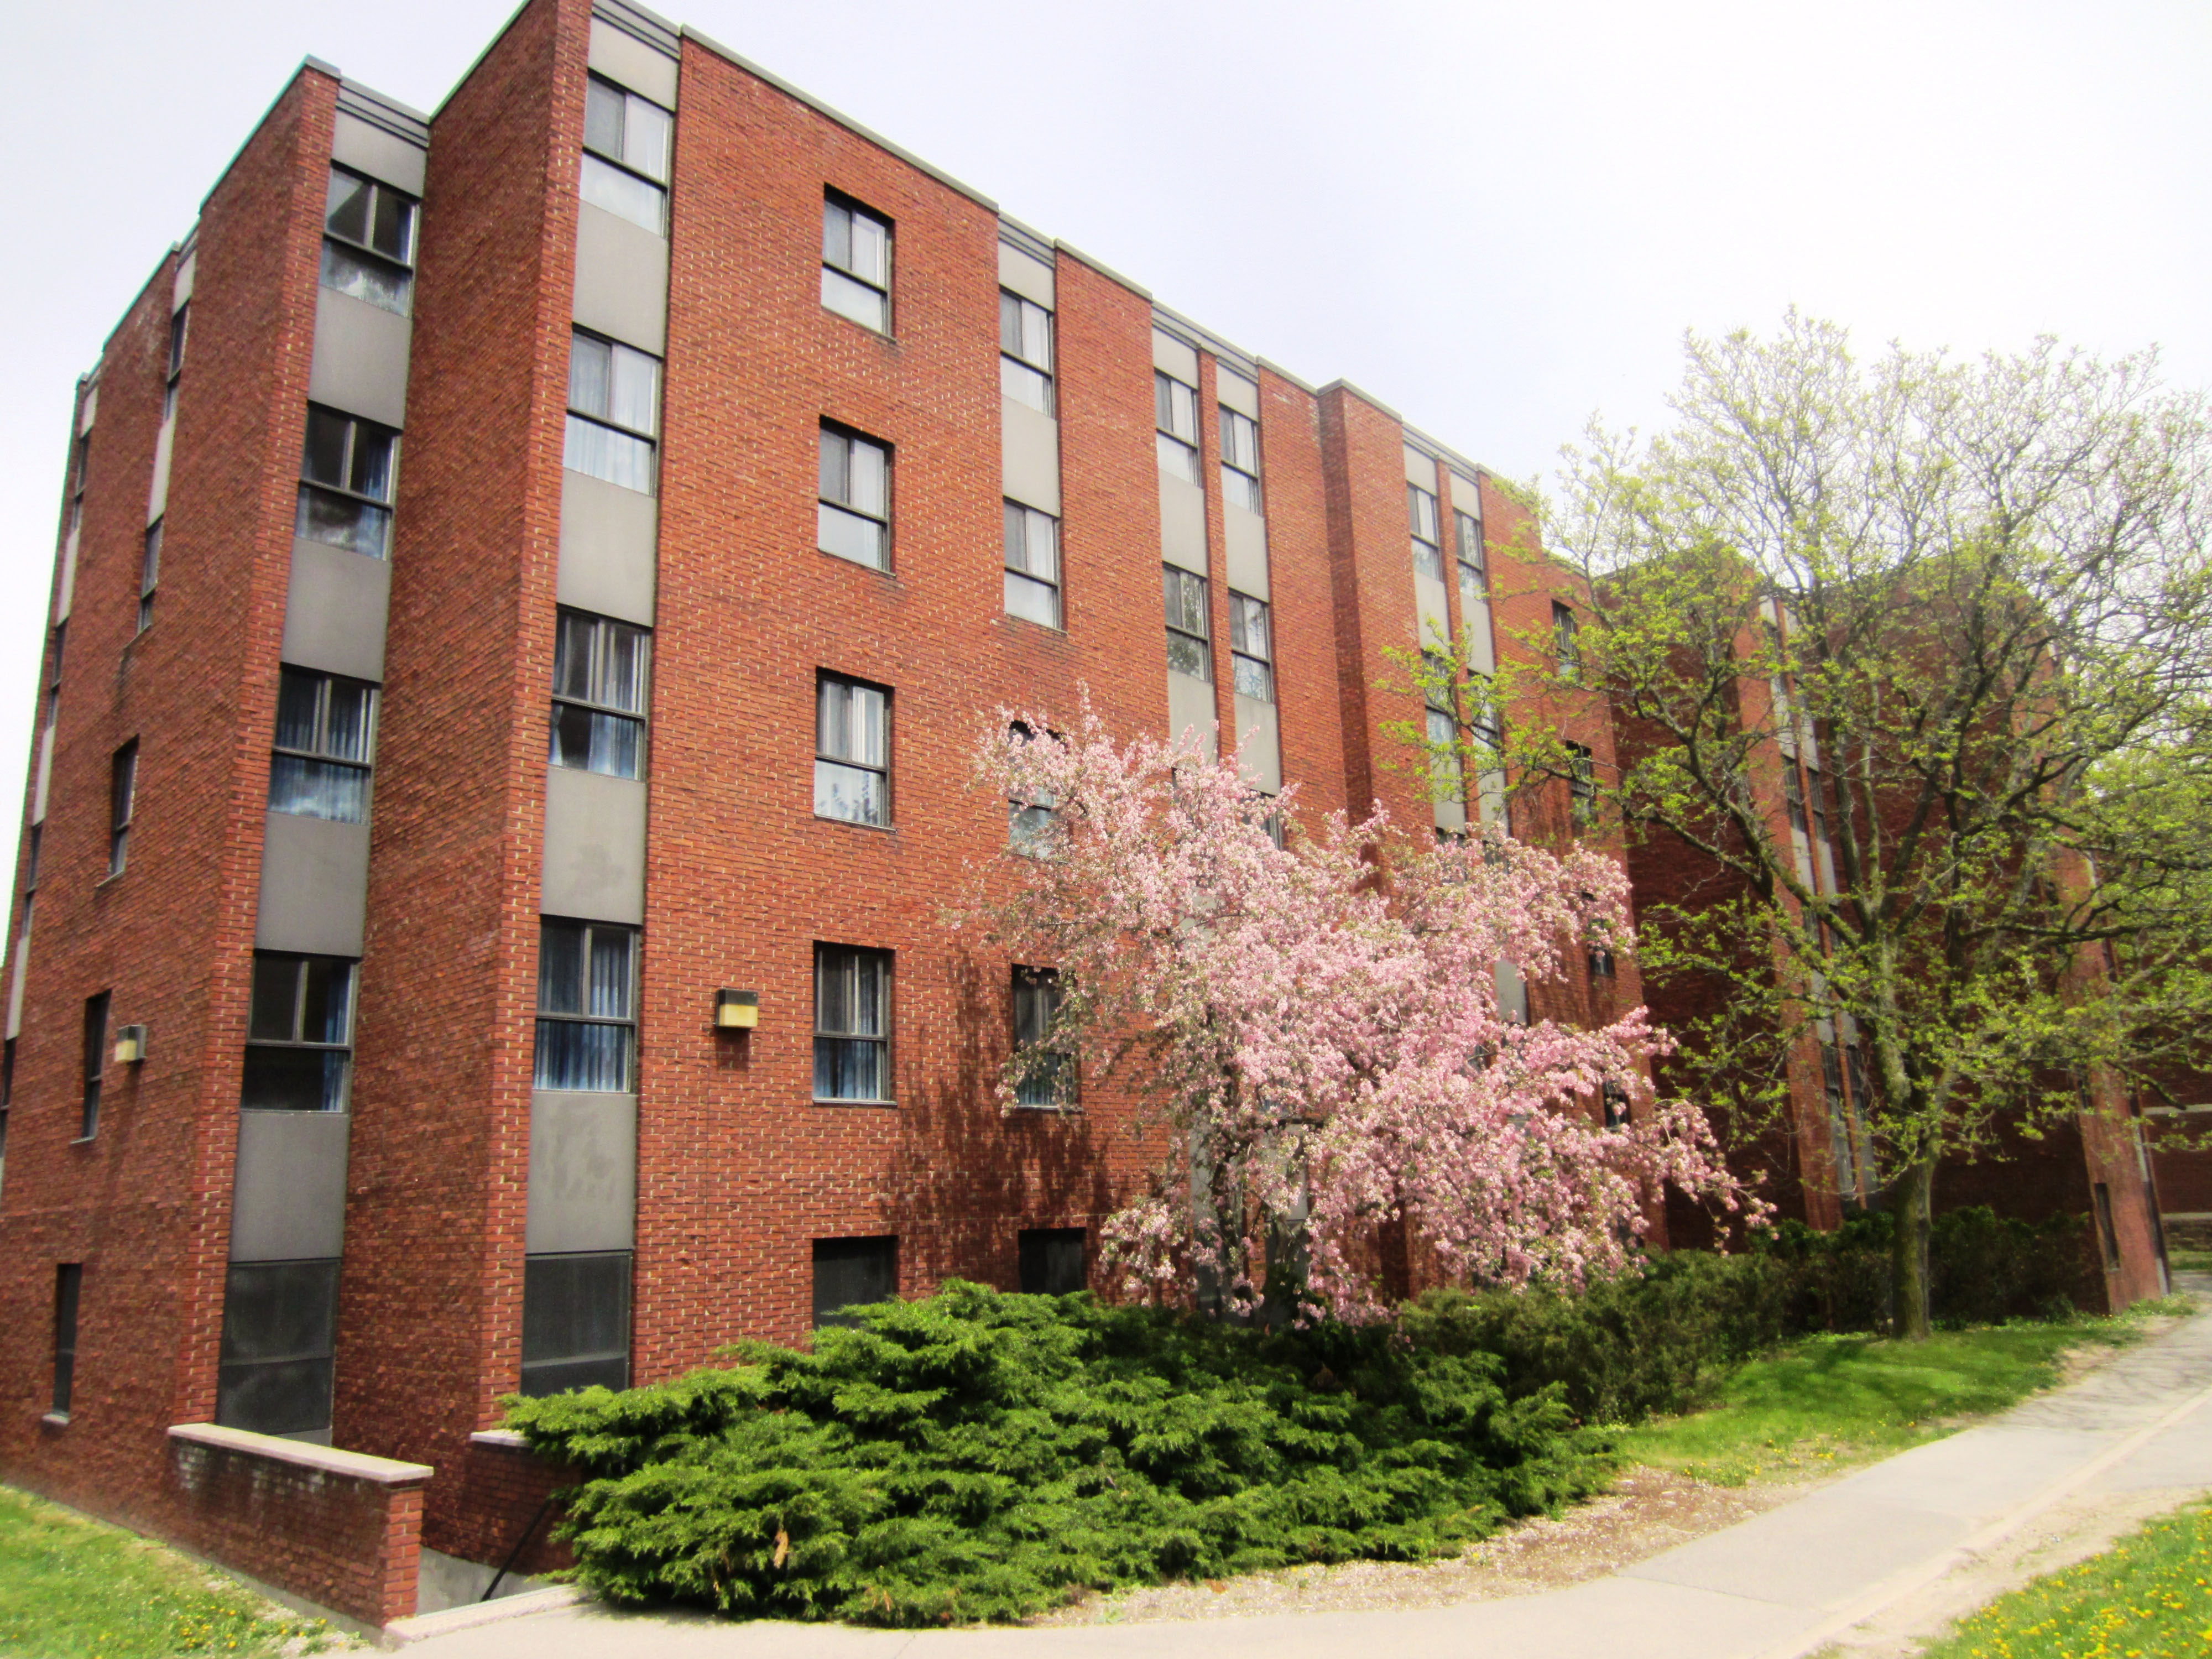 Bates Residence is located in the west quad at McMaster University